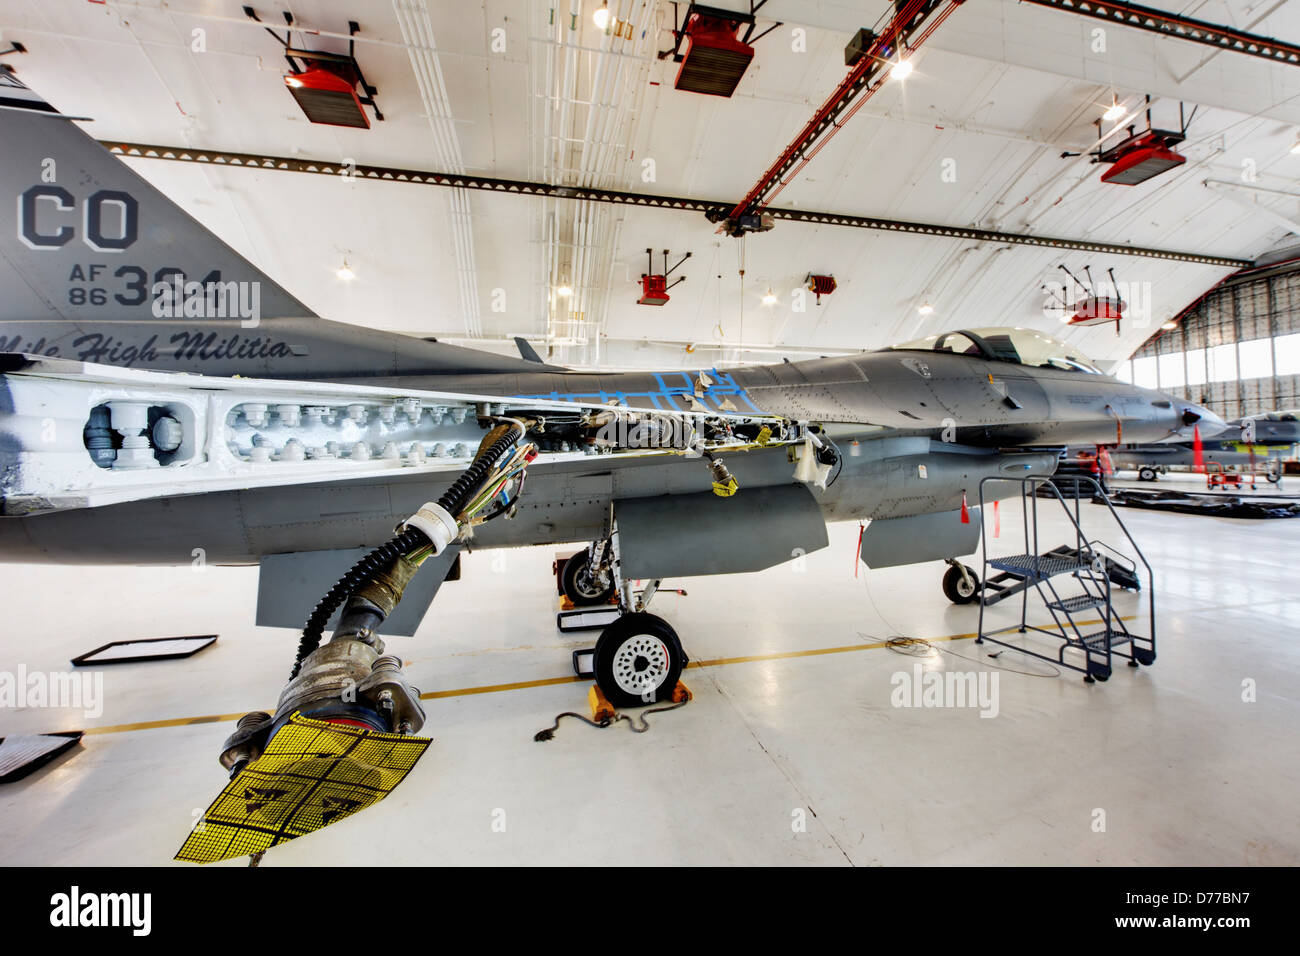 F-16 in Maintenance Hangar Showing Disassembled Wing High Dynamic Range or HDR Image Stock Photo